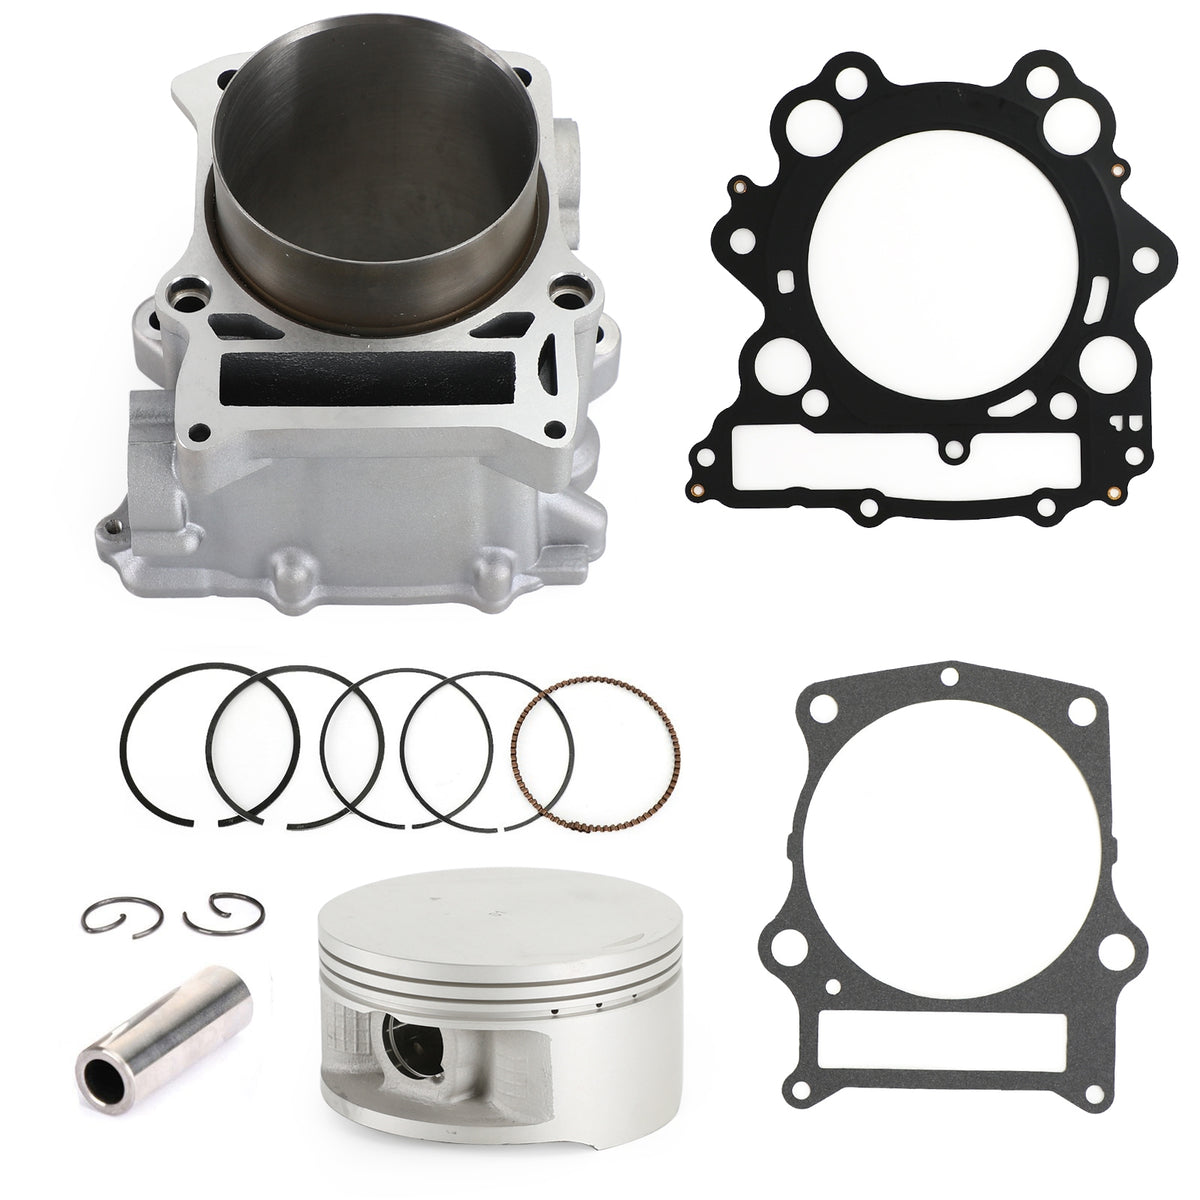 102mm Big Bore Cylinder Kit 686cc For Yamaha YFM660 660F Grizzly 660 2002-2008 Generic DHL Express Shipping